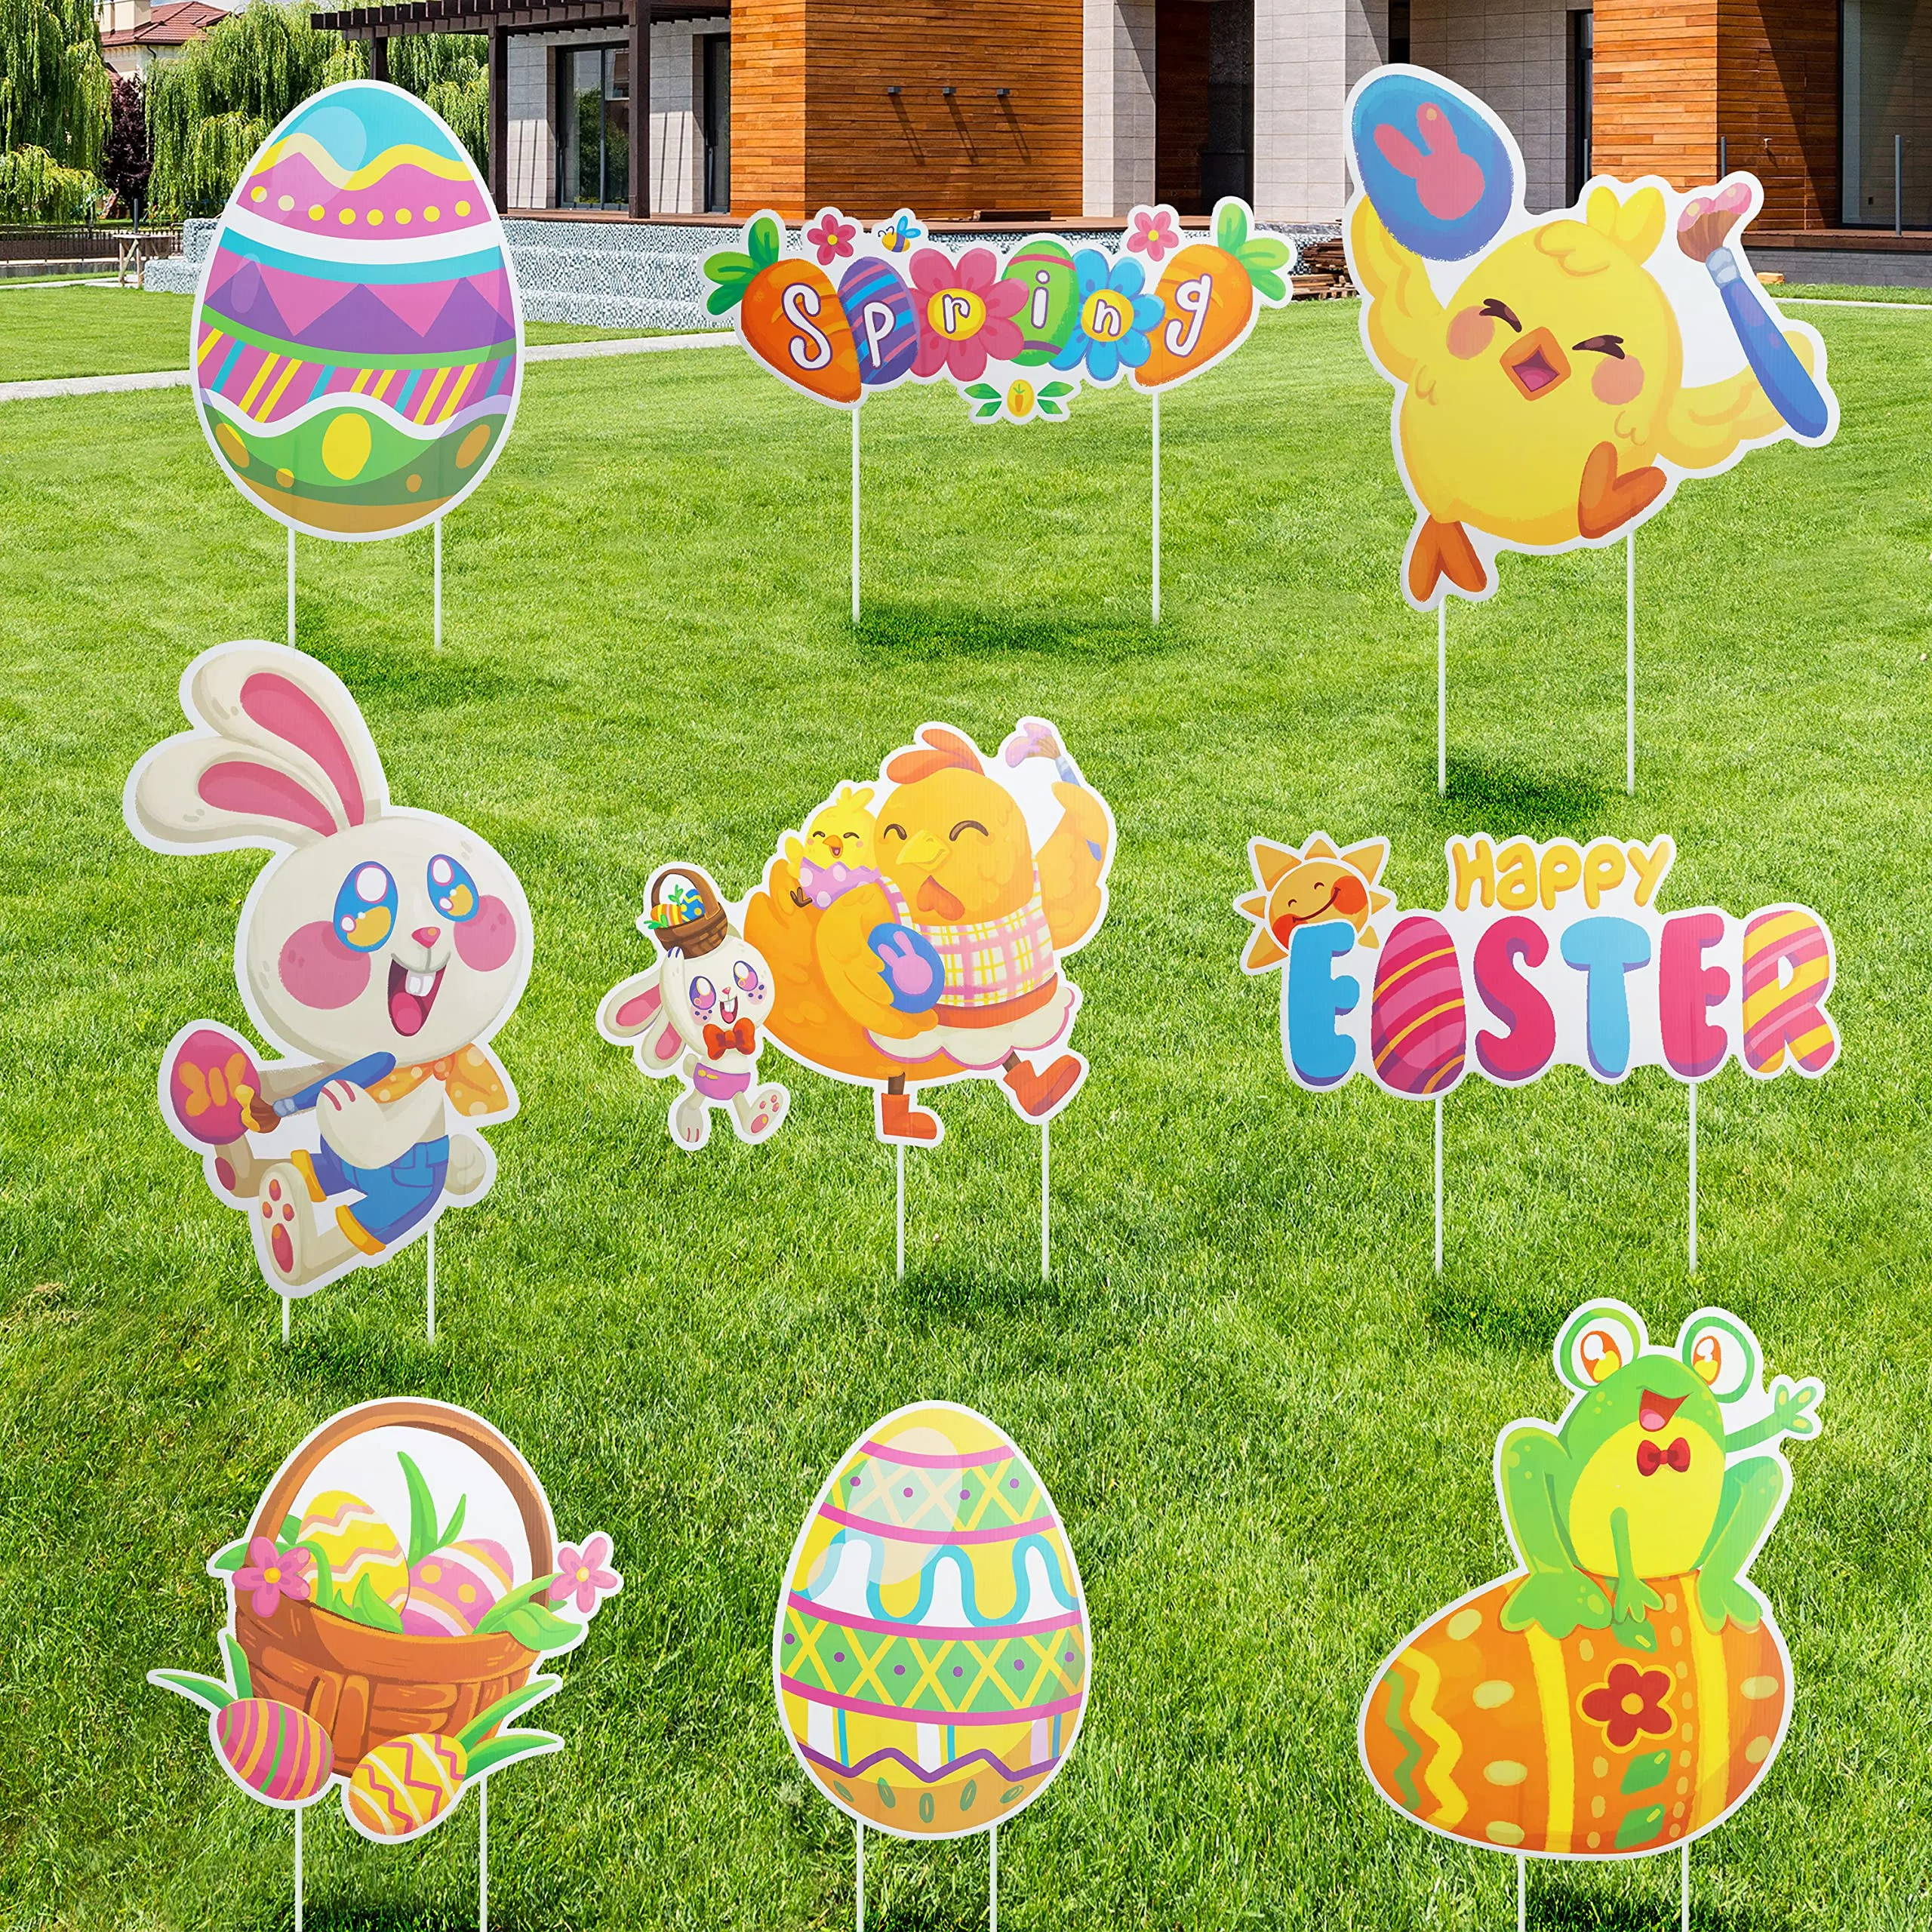 You are currently viewing Edible Easter Decorations: Fun and Tasty Treats for the Season